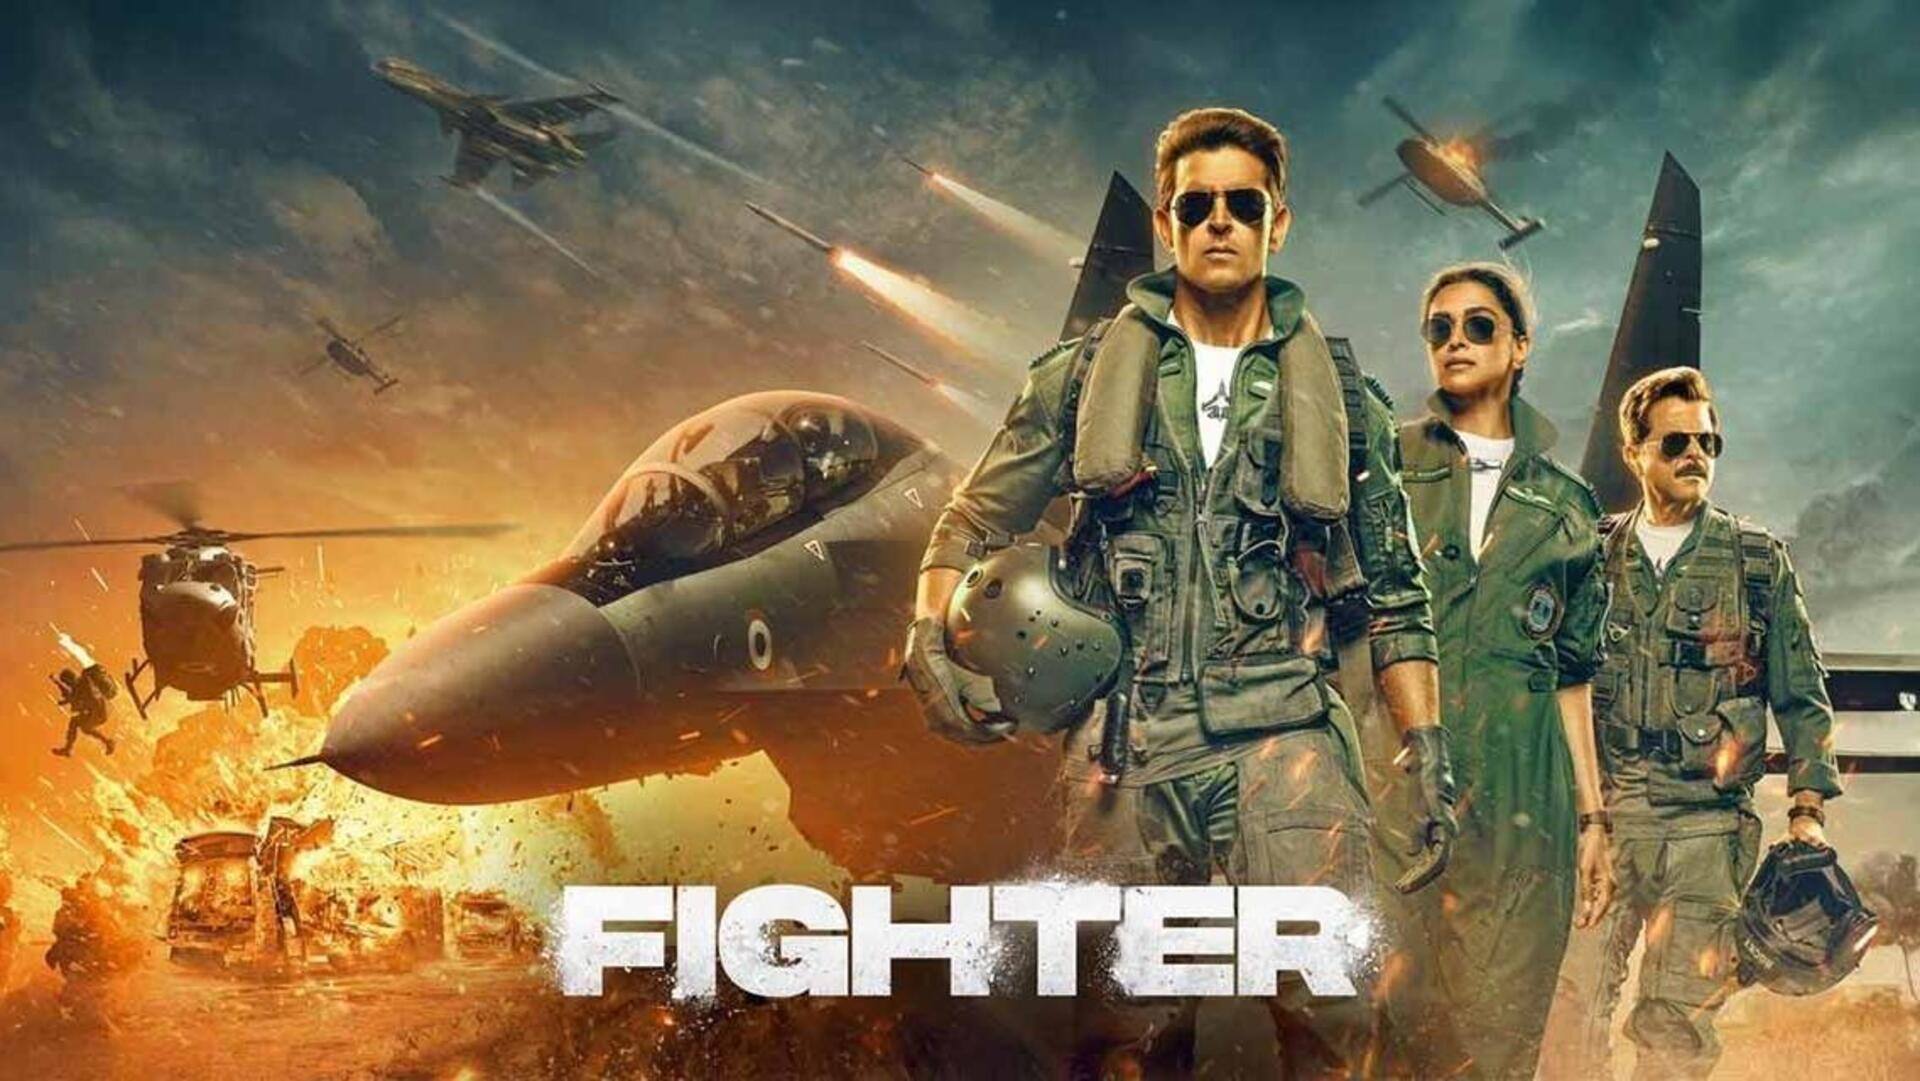 Box office collection: 'Fighter' fights for commercial longevity with ease